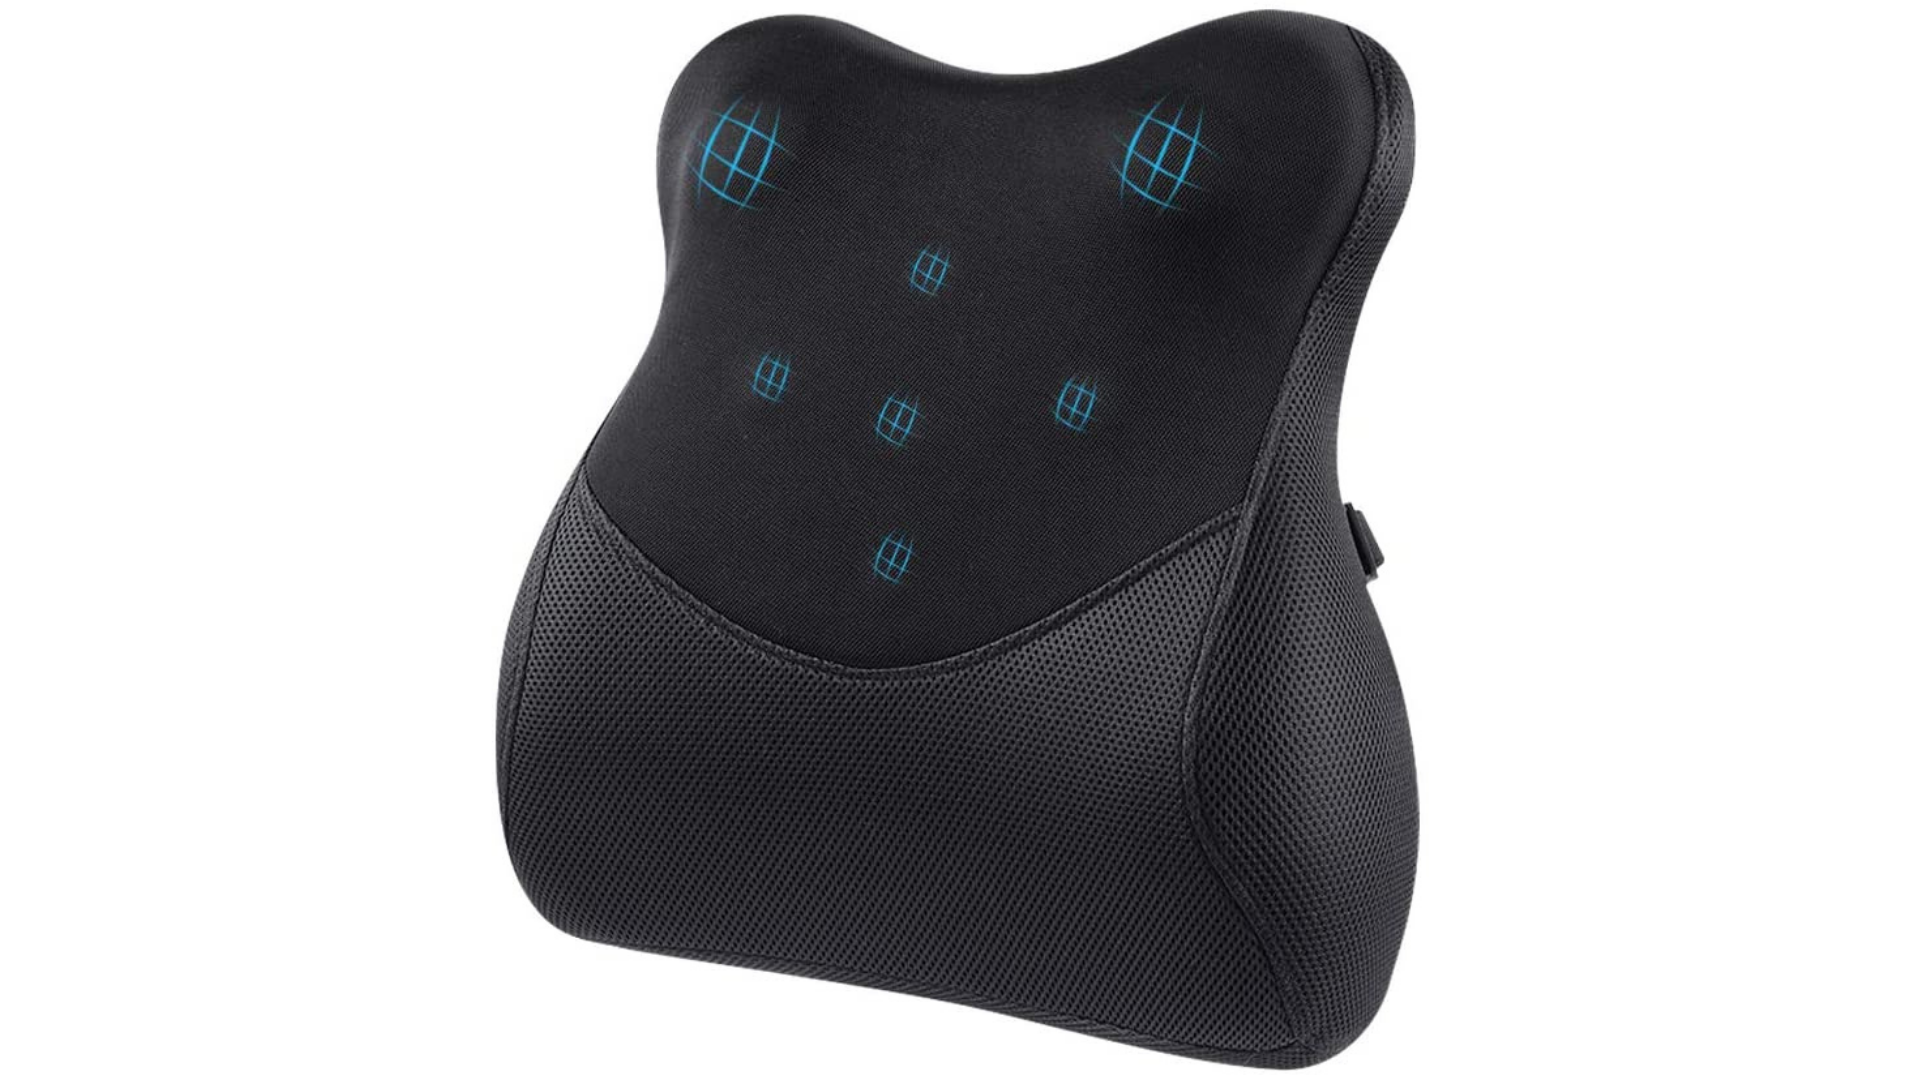 Mkicesky best lumbar support office chair